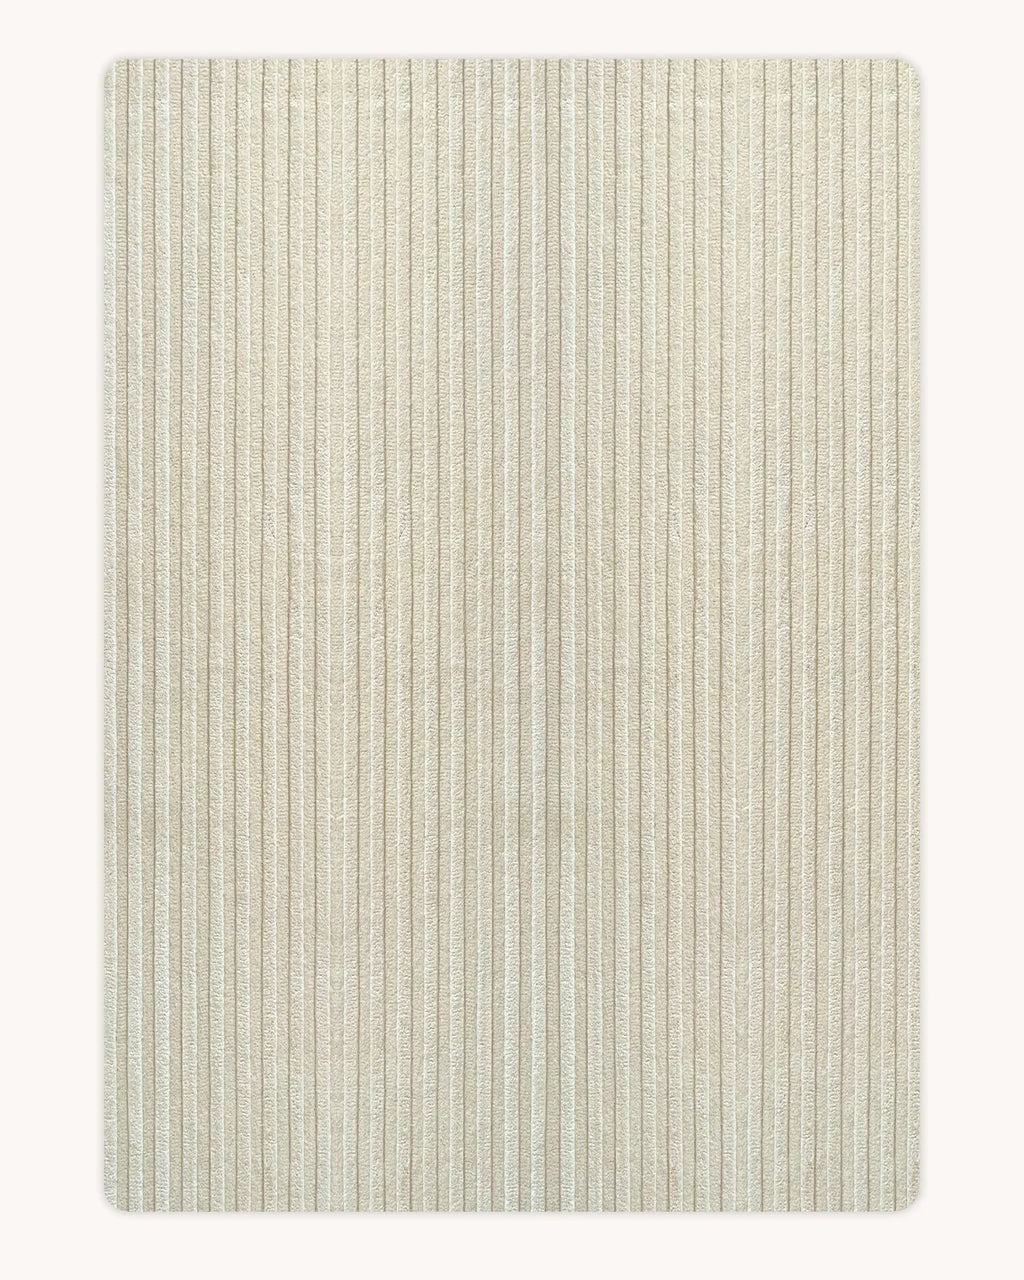 Solid Stripe Rug Off White 170 x 240